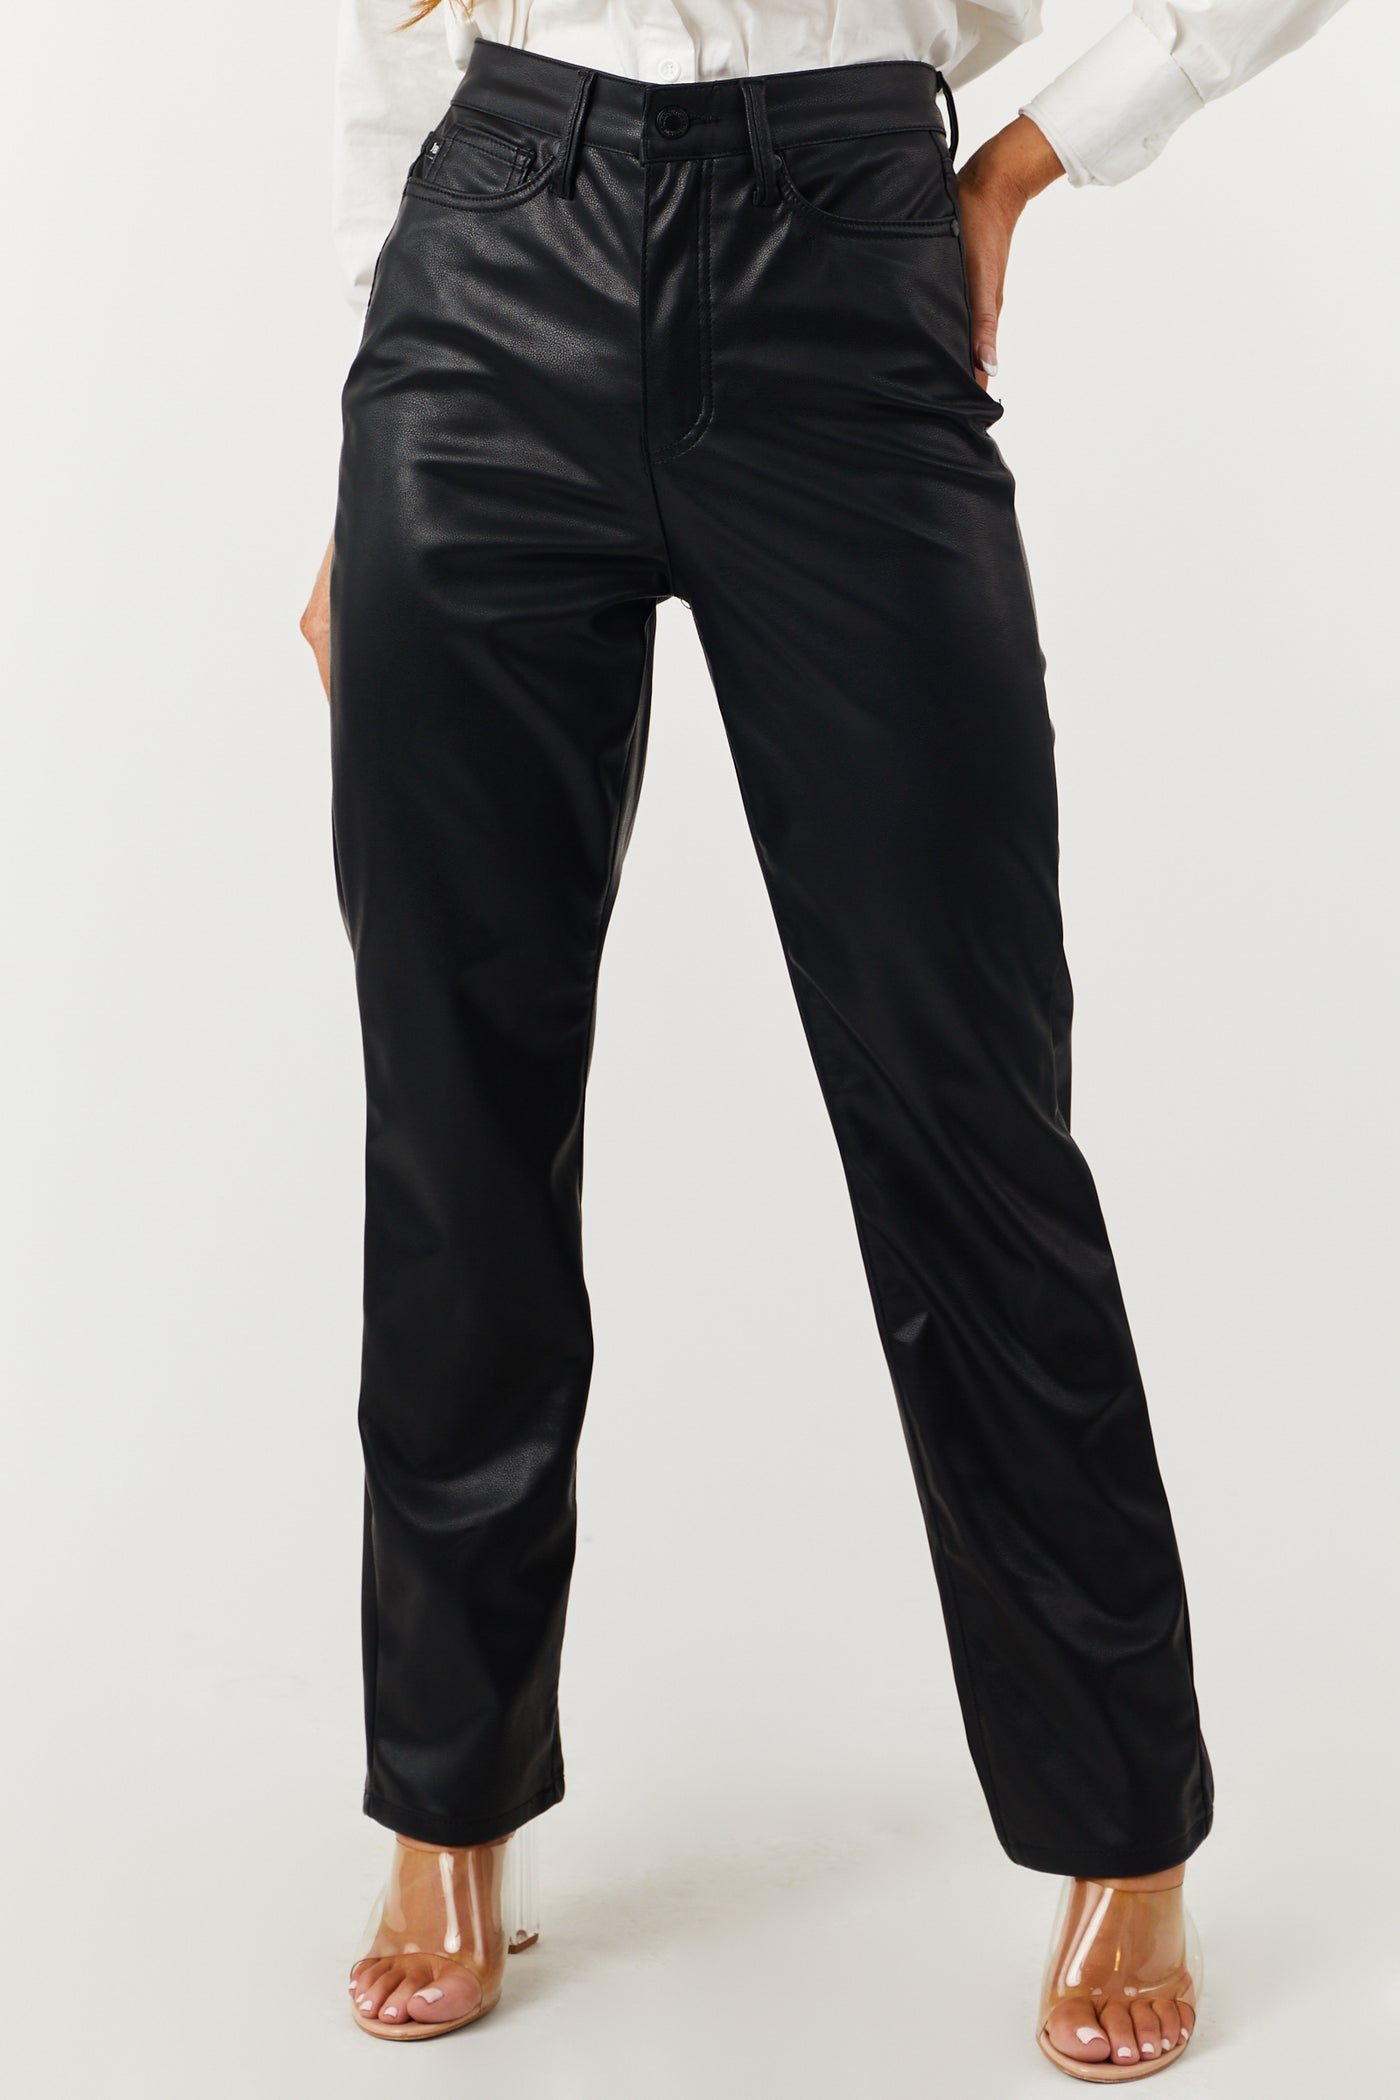 Judy Blue Black Faux Leather Tummy Control Straight Pants